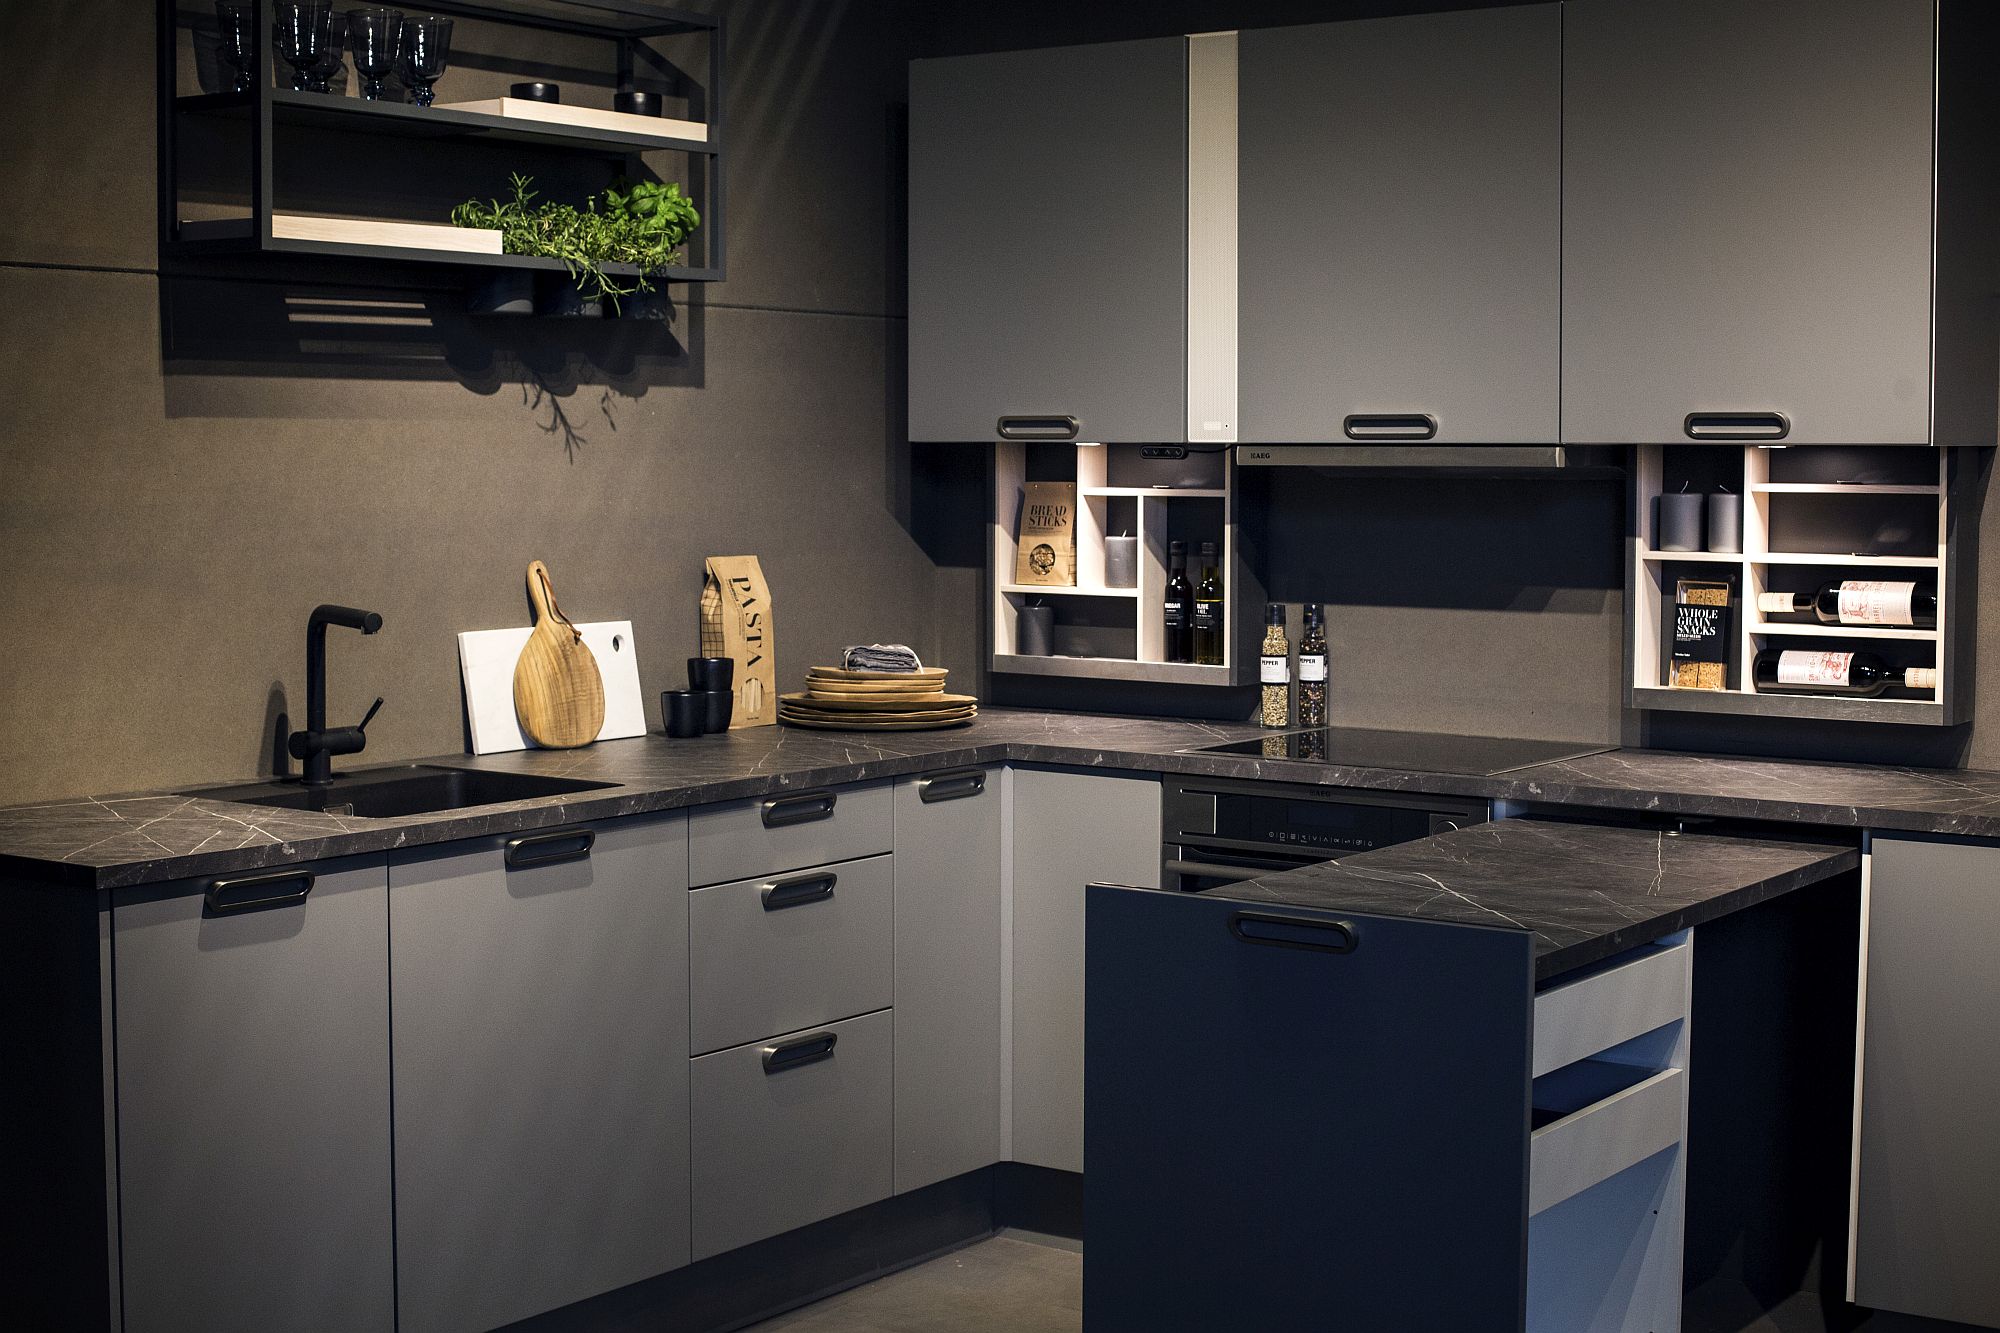 Corner kitchen design is an extension of the single-wall kitchen